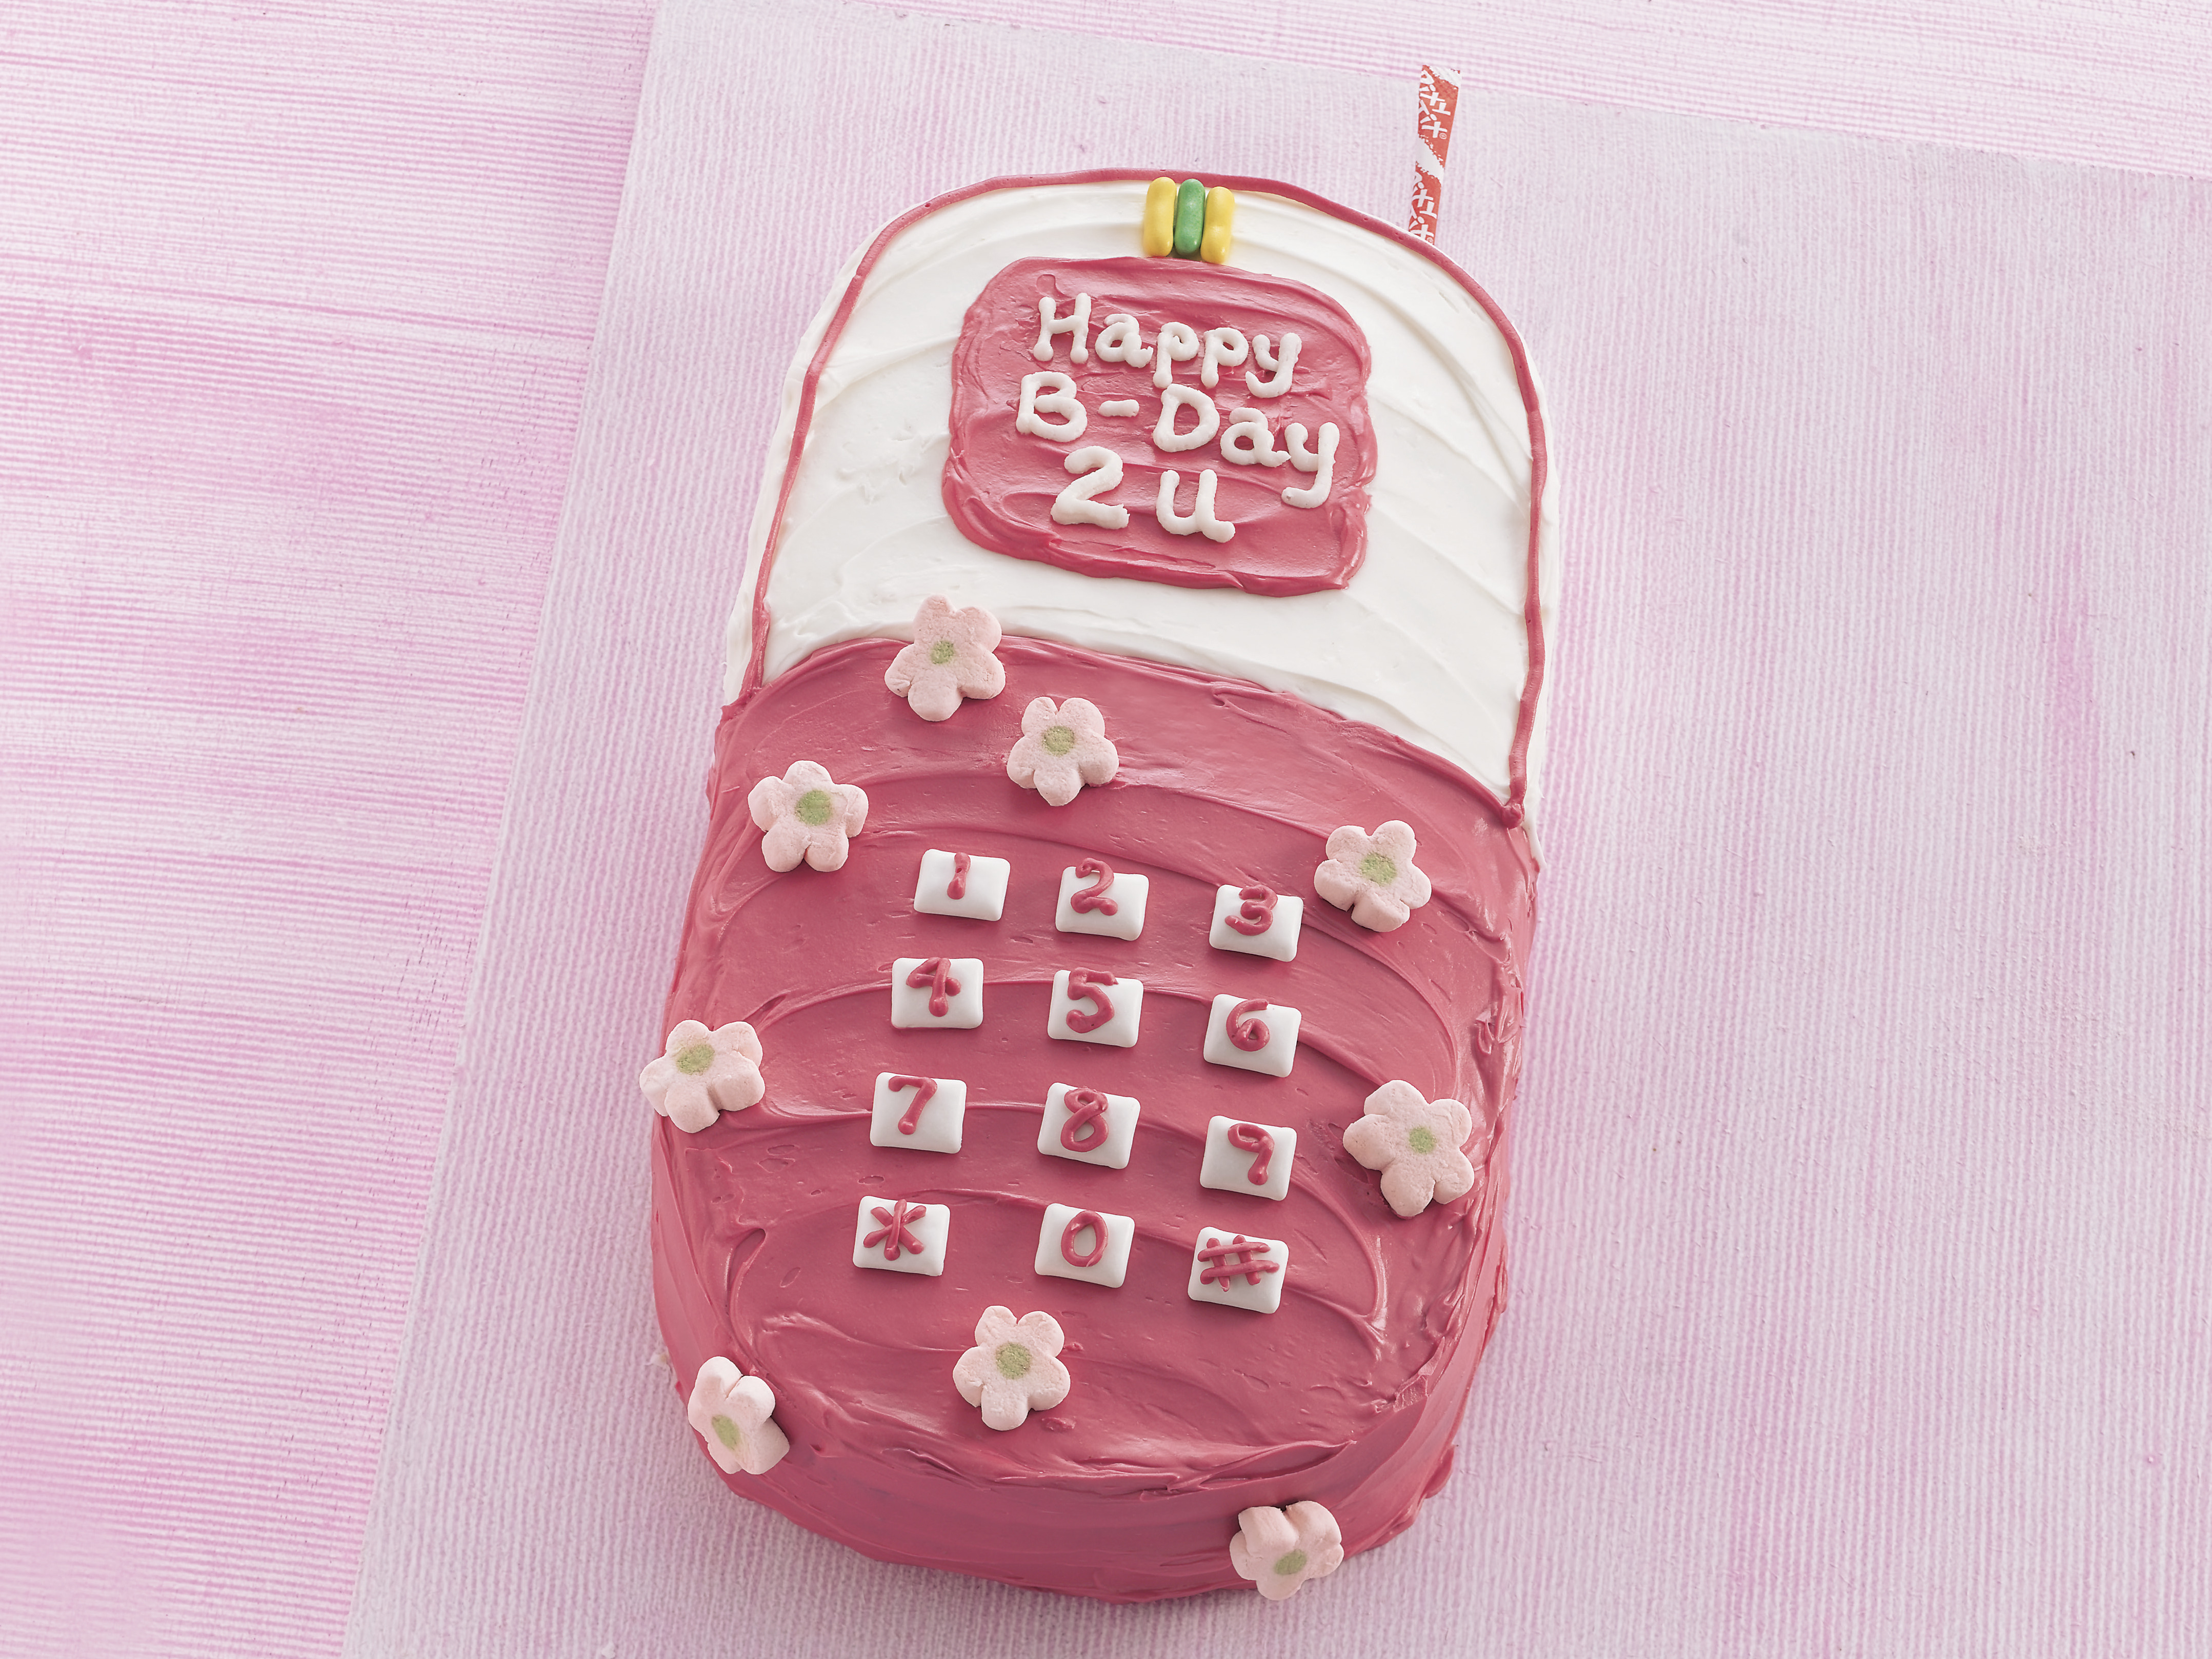 Phone cake — Birthday Cakes | Cake, Birthday cakes for teens, Party cooking